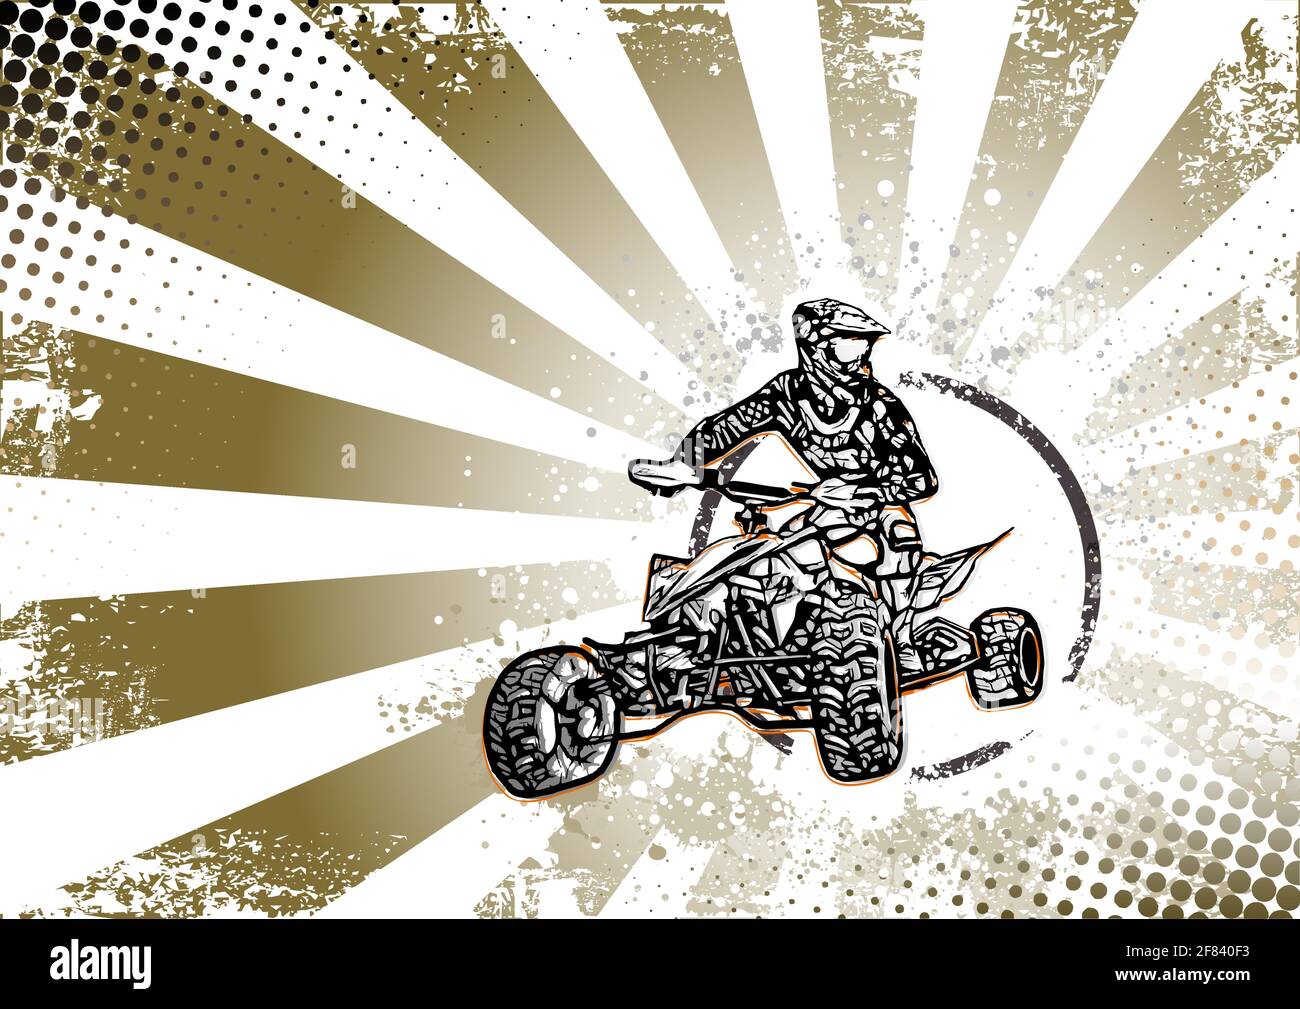 quad bike vector illustration on grungy background Stock Vector